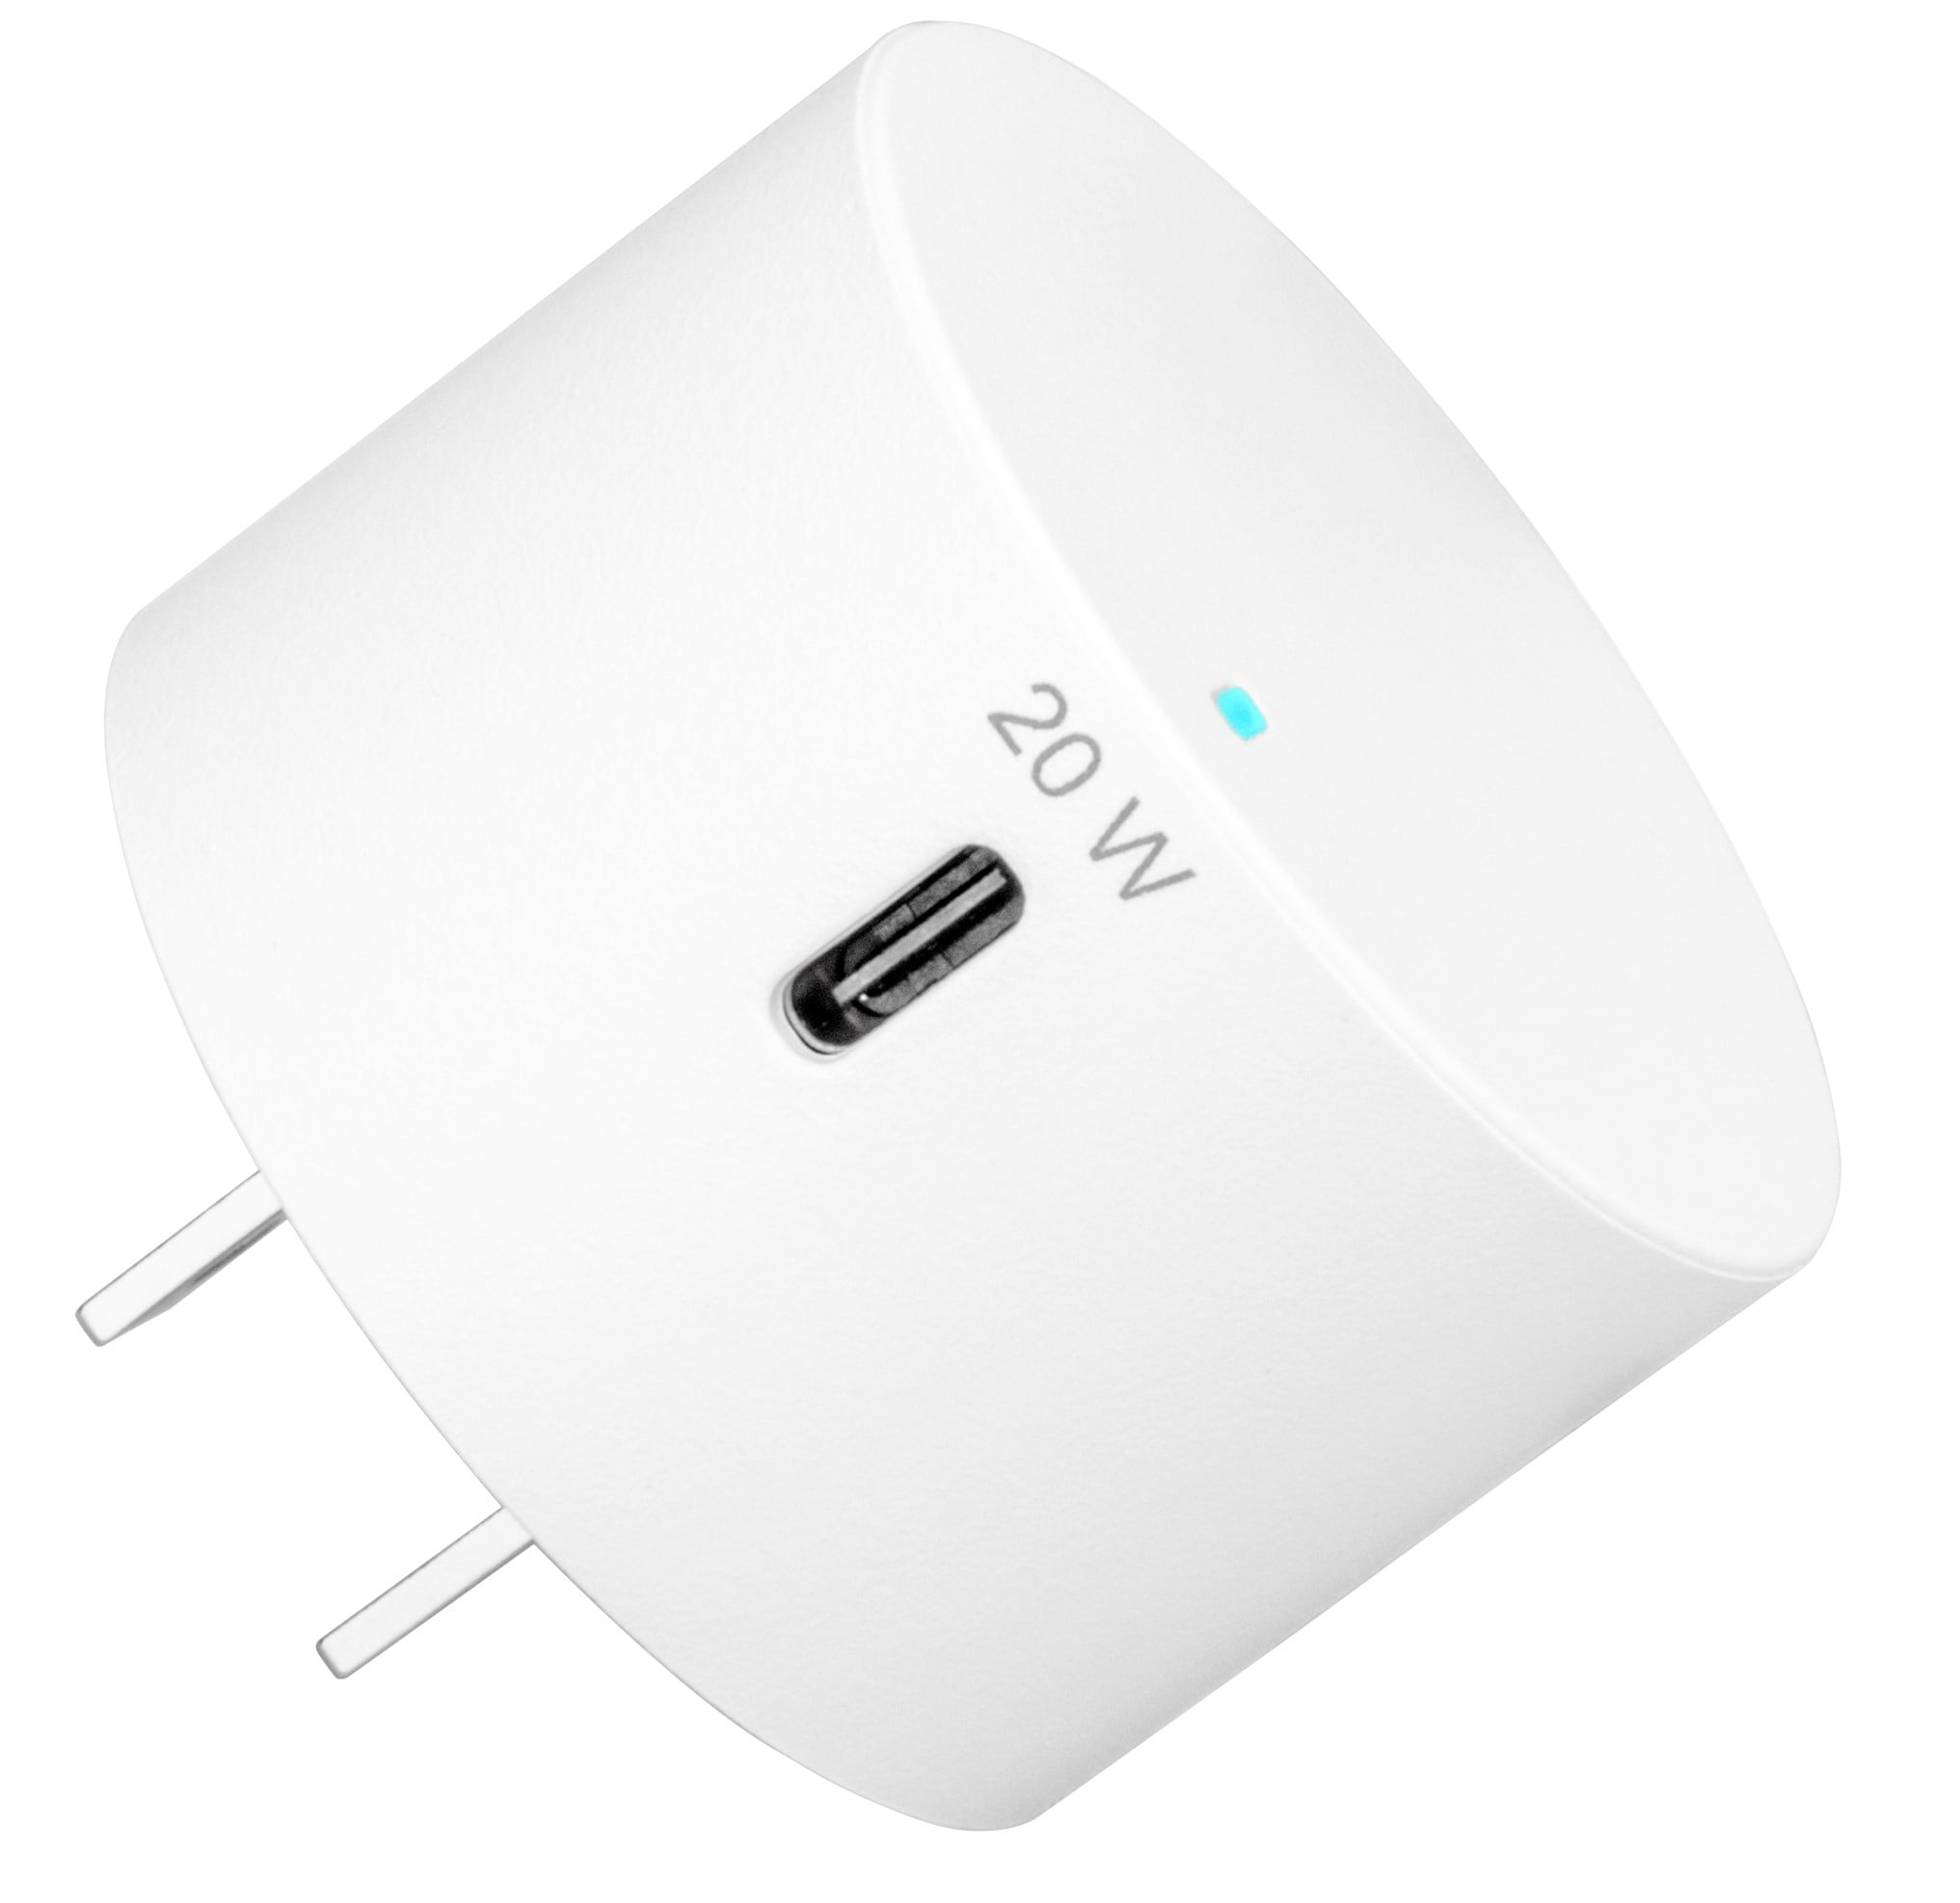 onn. 20W USB-C Wall Charger with Power Delivery, White, for iPhone models (13/12/11/SE/XS/XR/8 series), Samsung, Sony, and LG smartphone models, foldable plug for on the go.